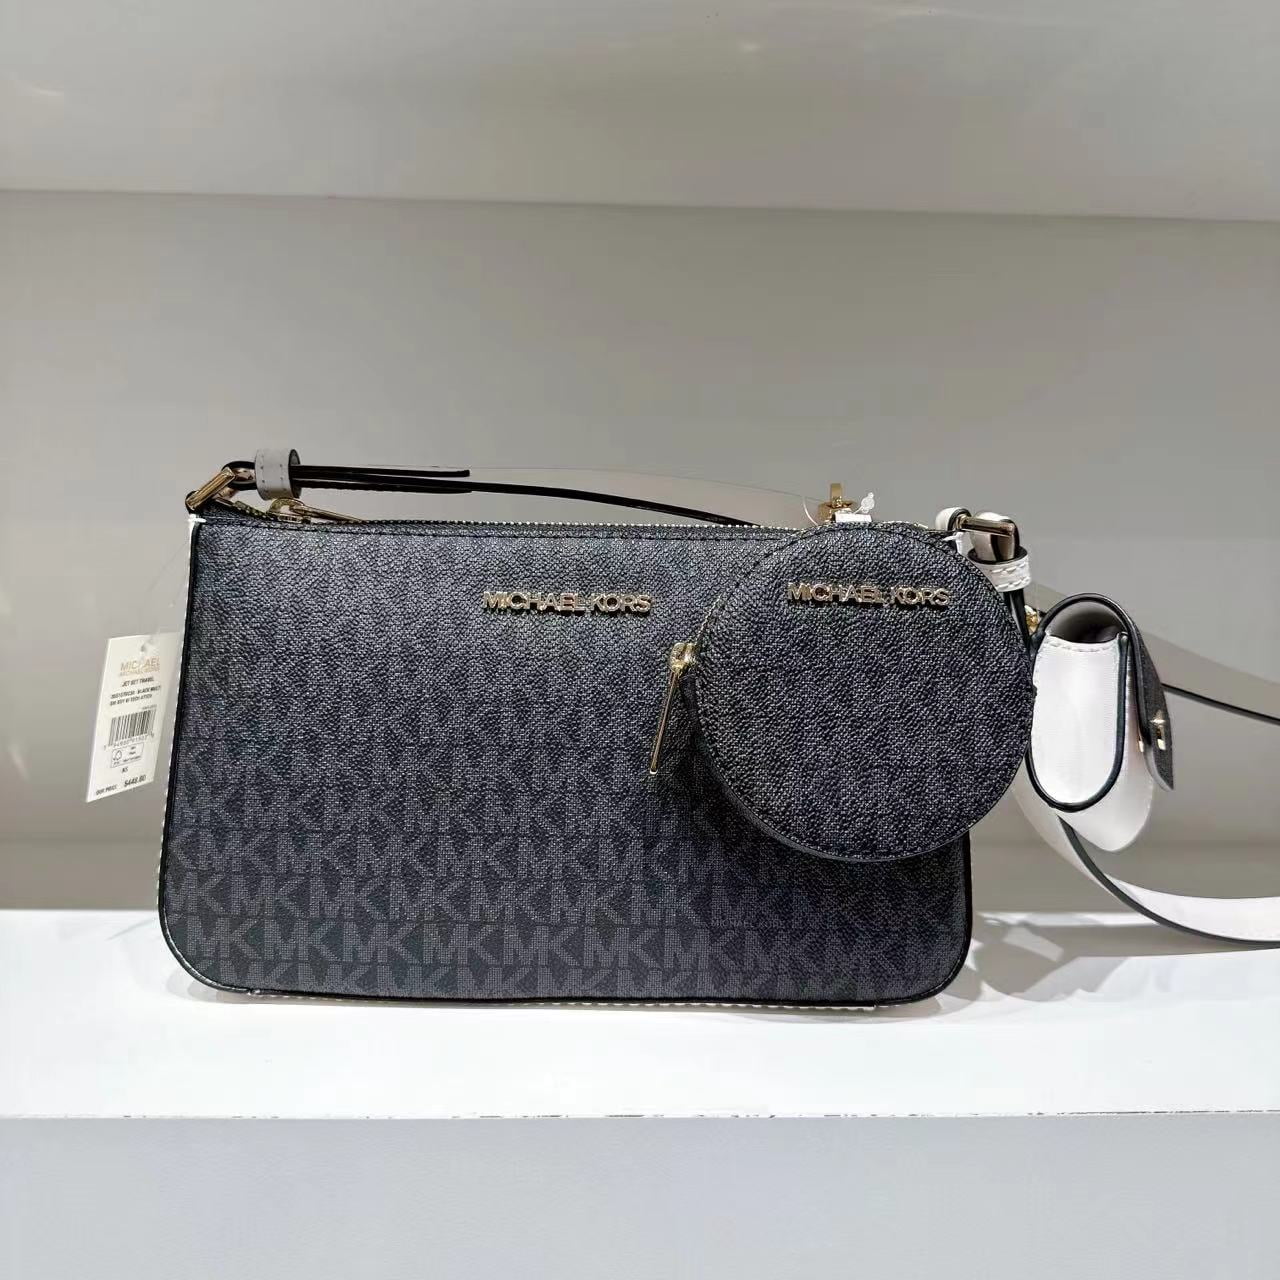 Michael Kors NWT Jet Set Travel Crossbody Bag & Card Case Bundle - $309 New  With Tags - From Britt